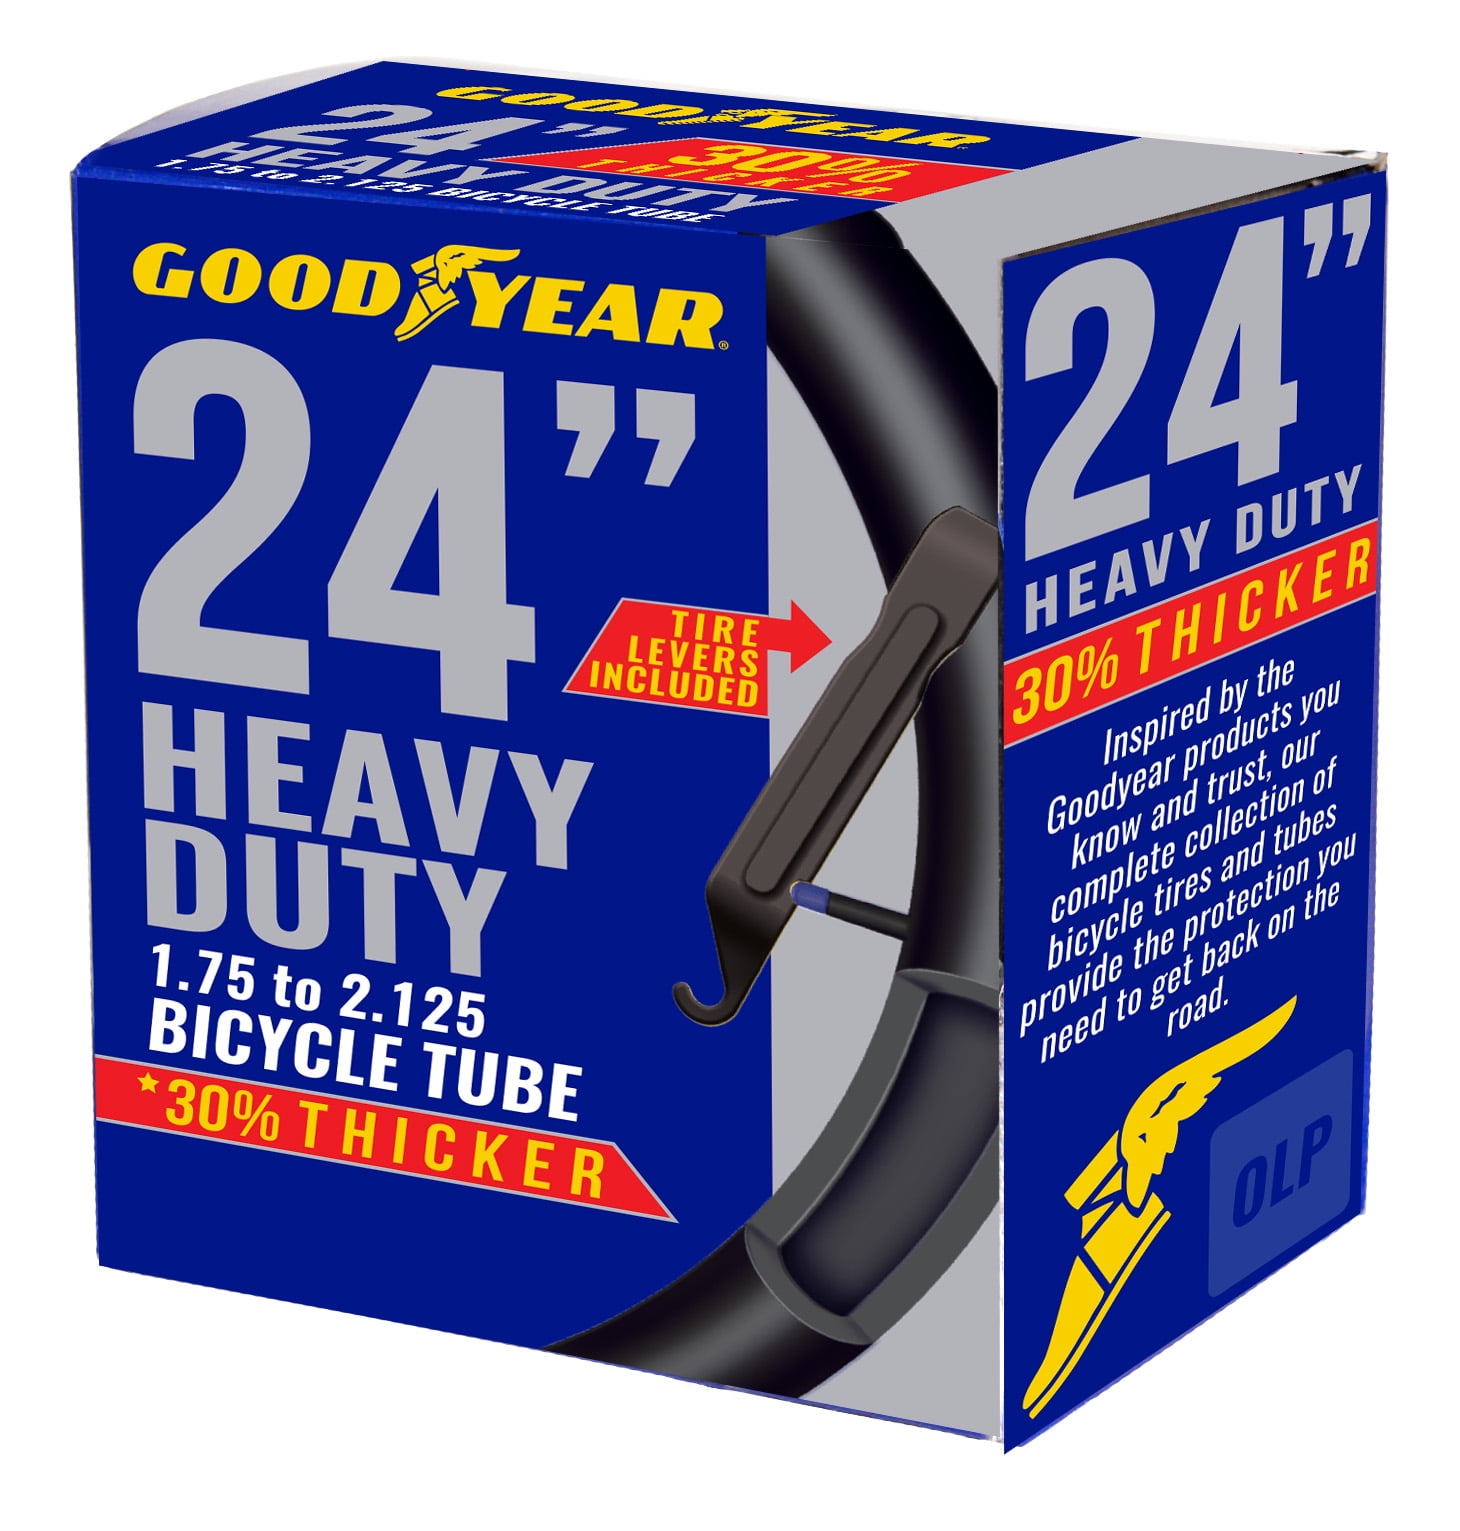 NEW Lot of 2 Goodyear 24" Heavy Duty Bike Bicycle Tubes 1.75-2.125 Tire Levers 